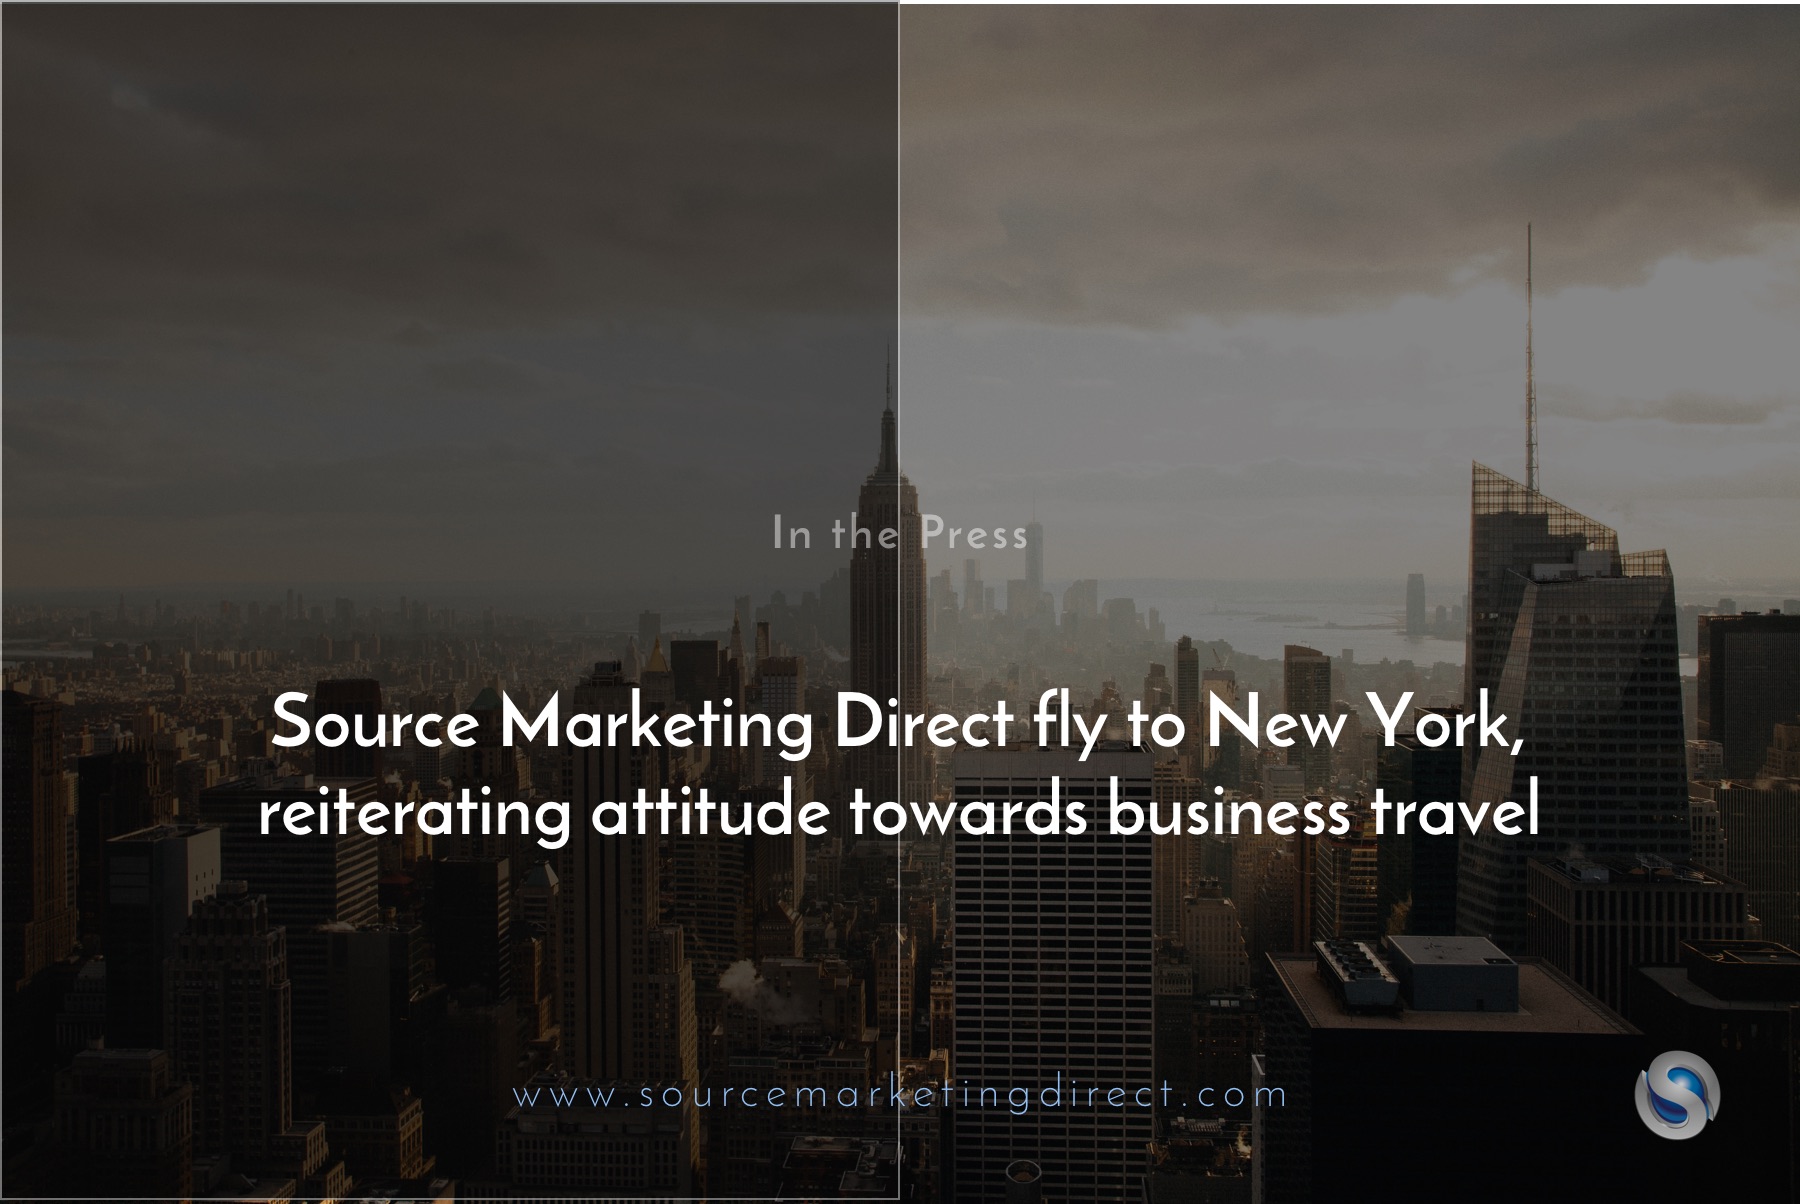 Source Marketing Direct fly to New York, reiterating attitude towards business travel